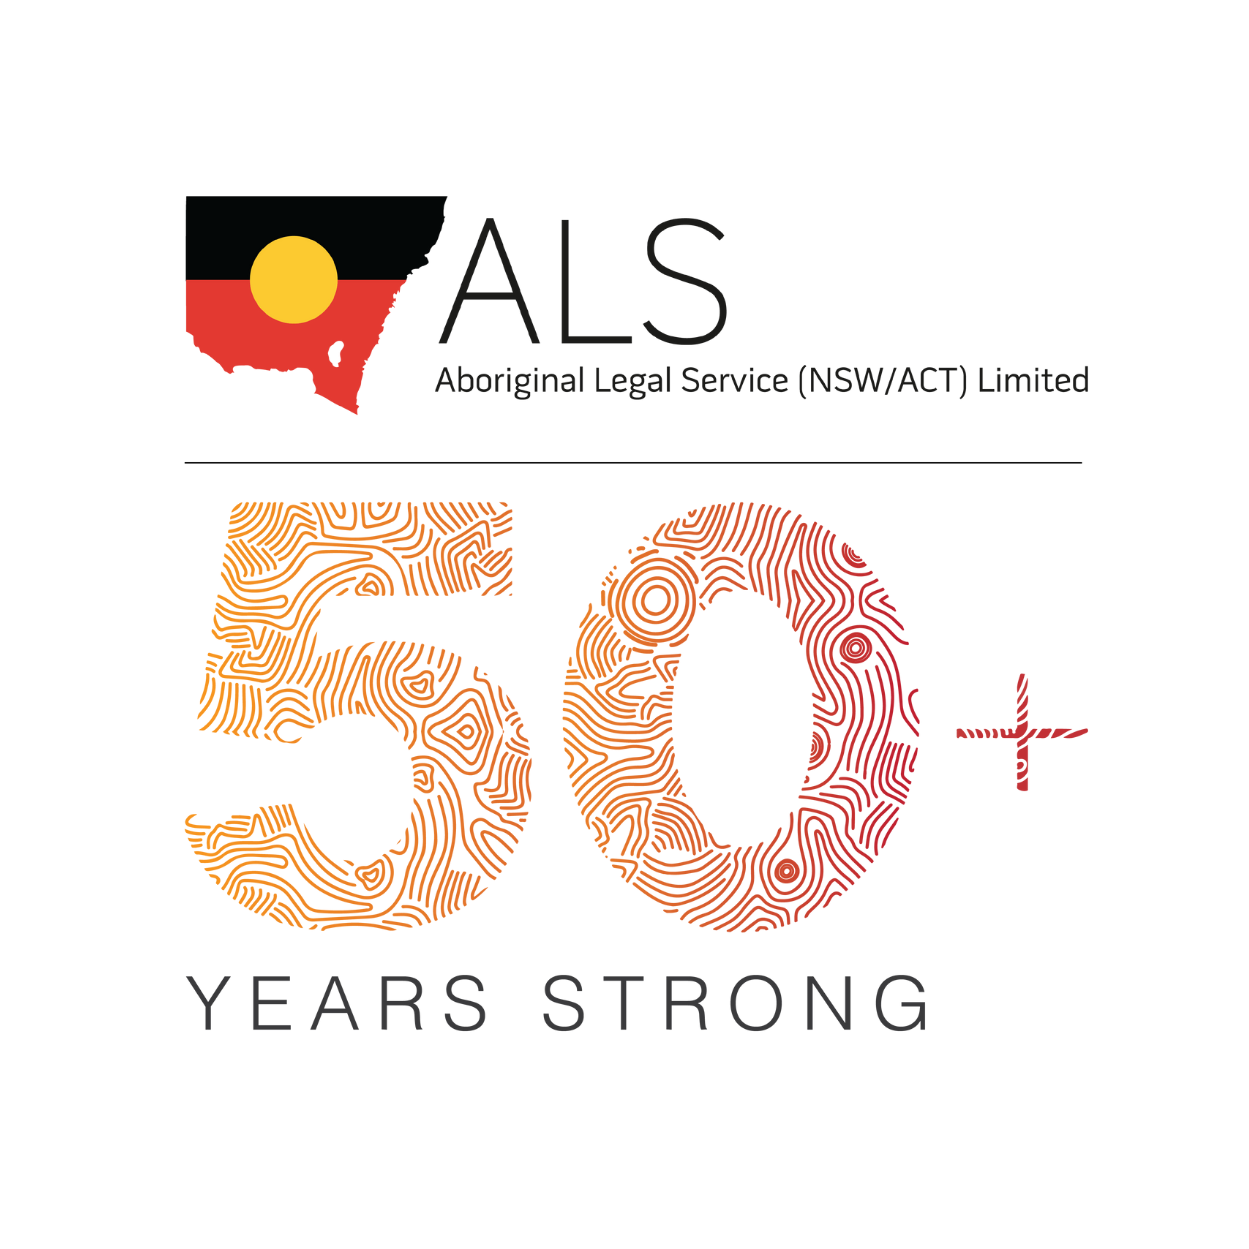 Business logo of Aboriginal Legal Service (NSW/ACT)